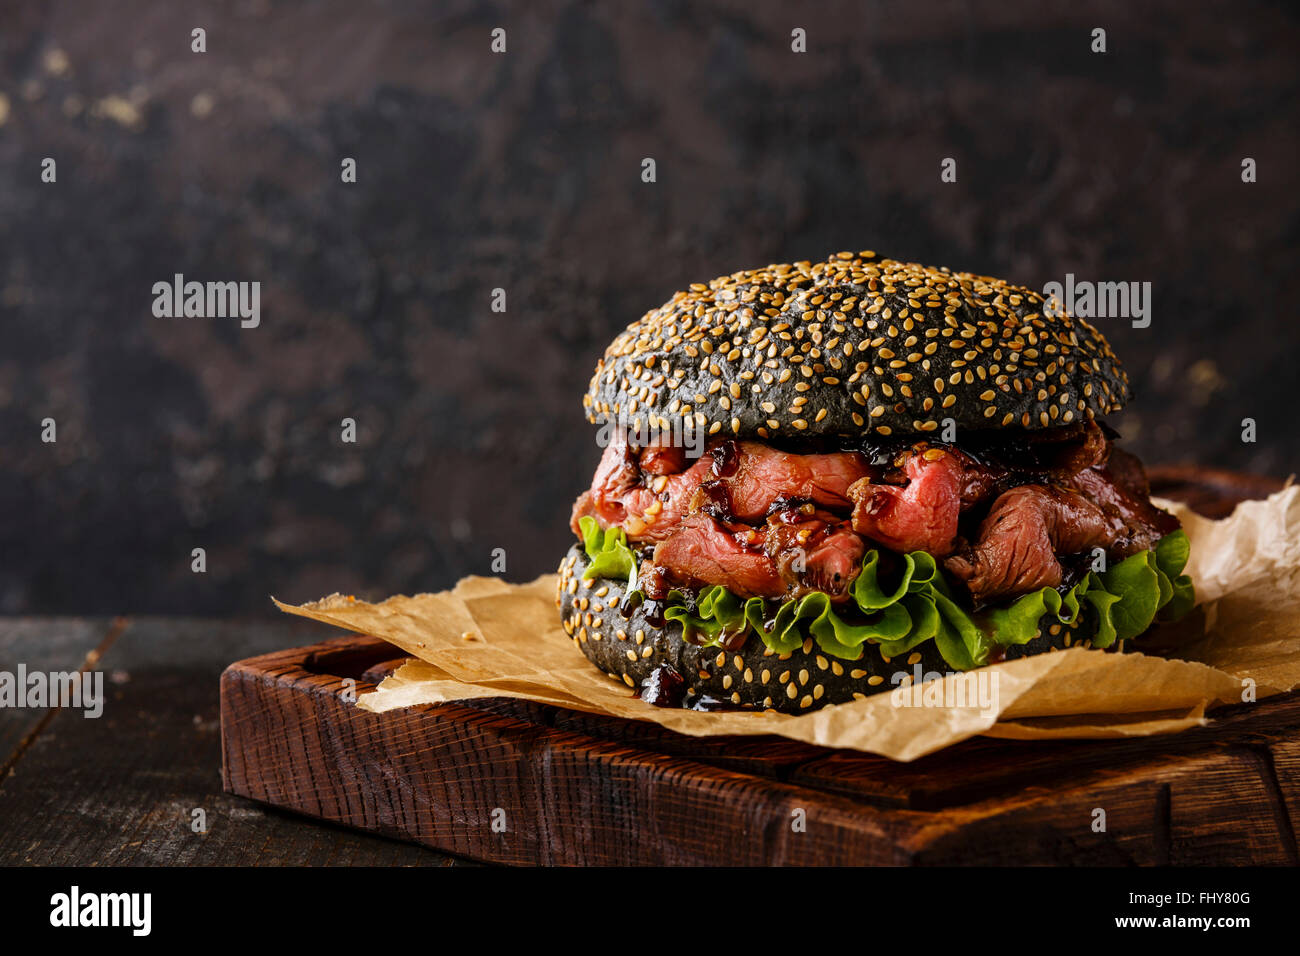 Roast beef Burger Takeaway snack on sesame bun with sliced Pastrami on black background Stock Photo